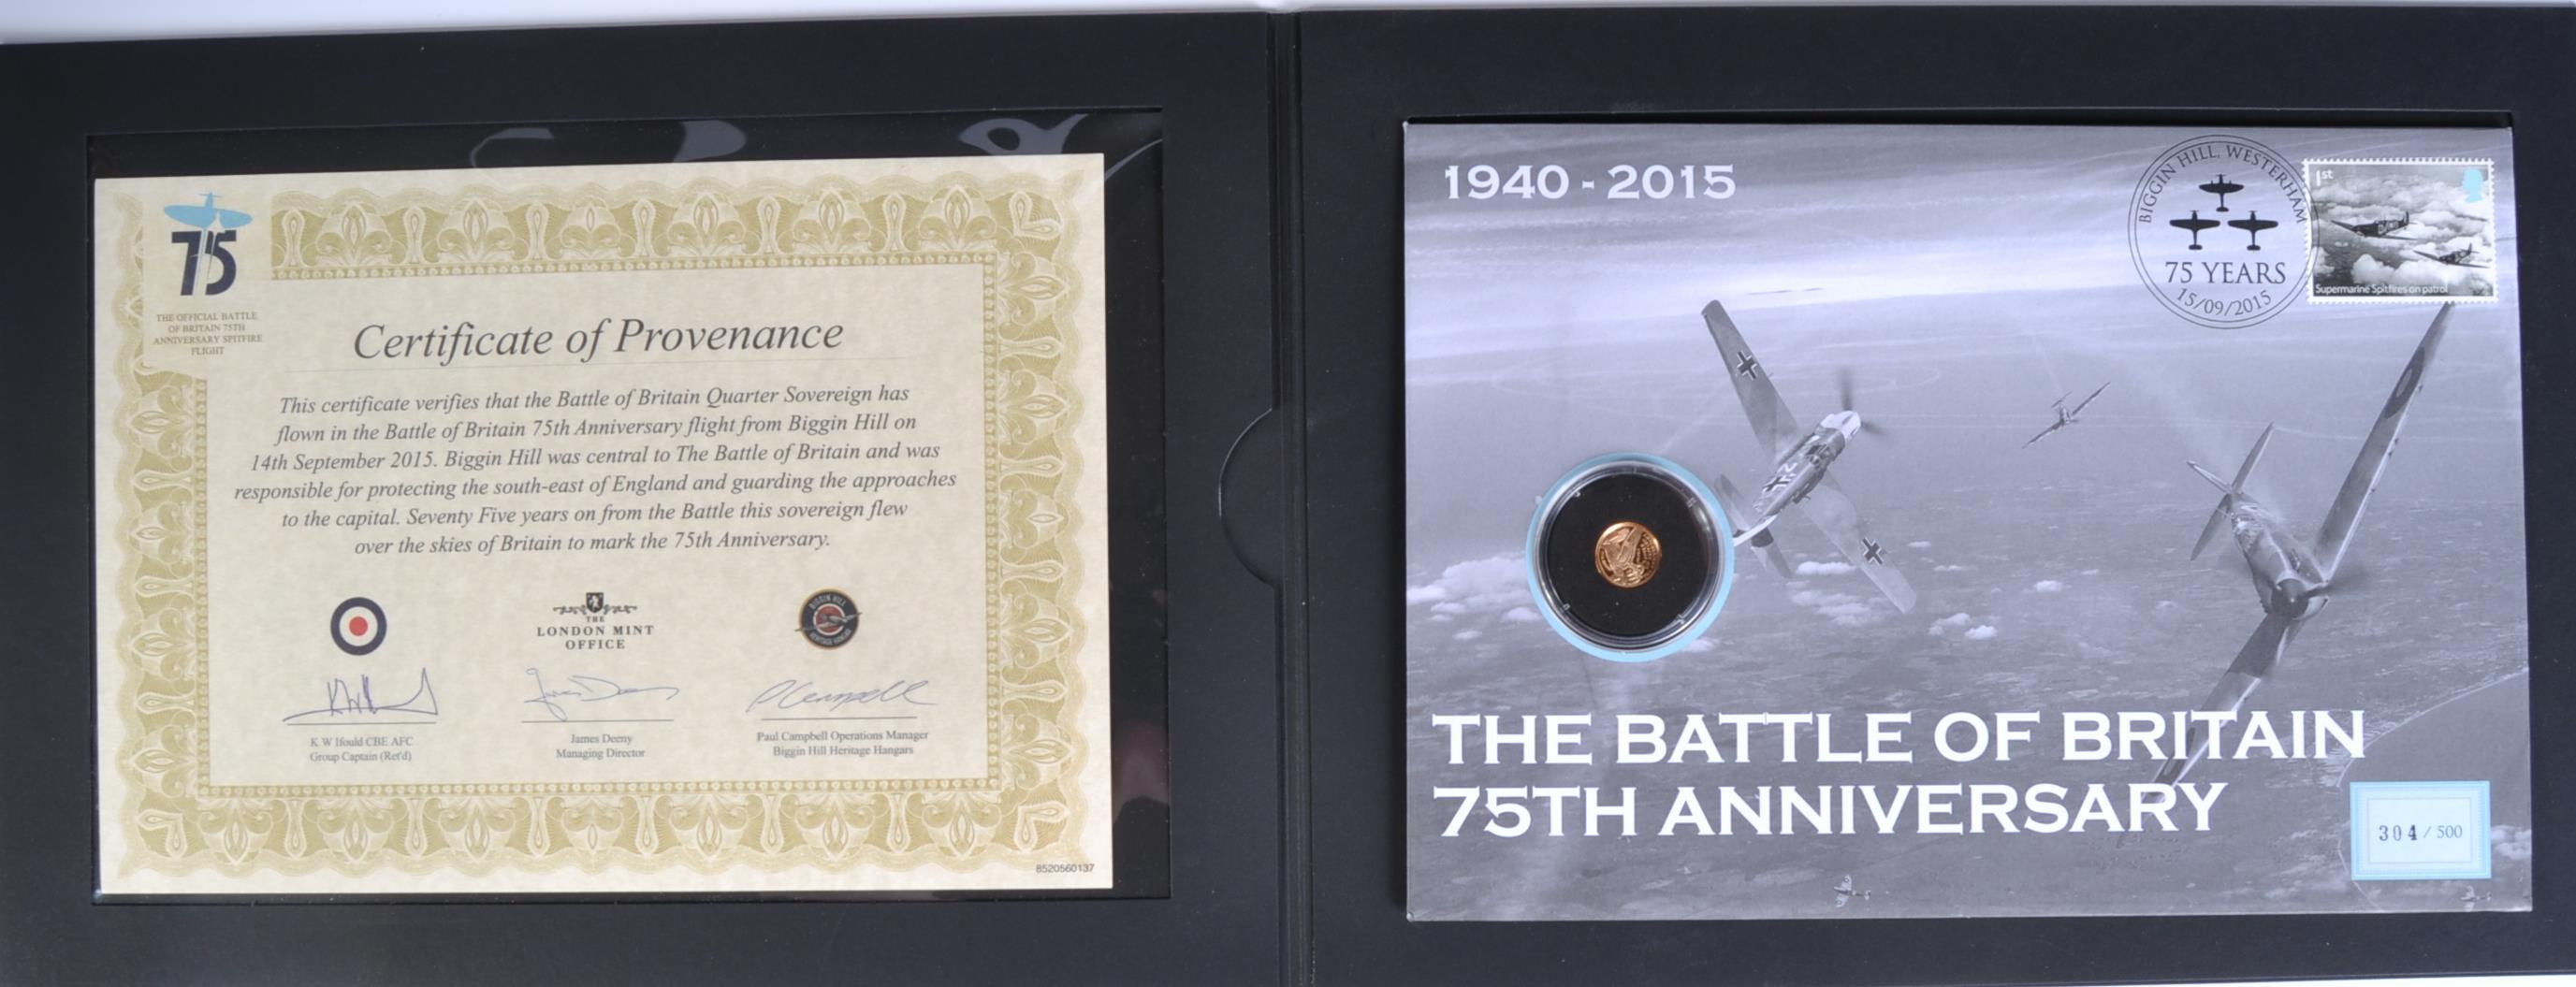 COINS / STAMPS - BATTLE OF BRITAIN 75TH ANNIVERSARY SOVEREIGN COVER - Image 2 of 5